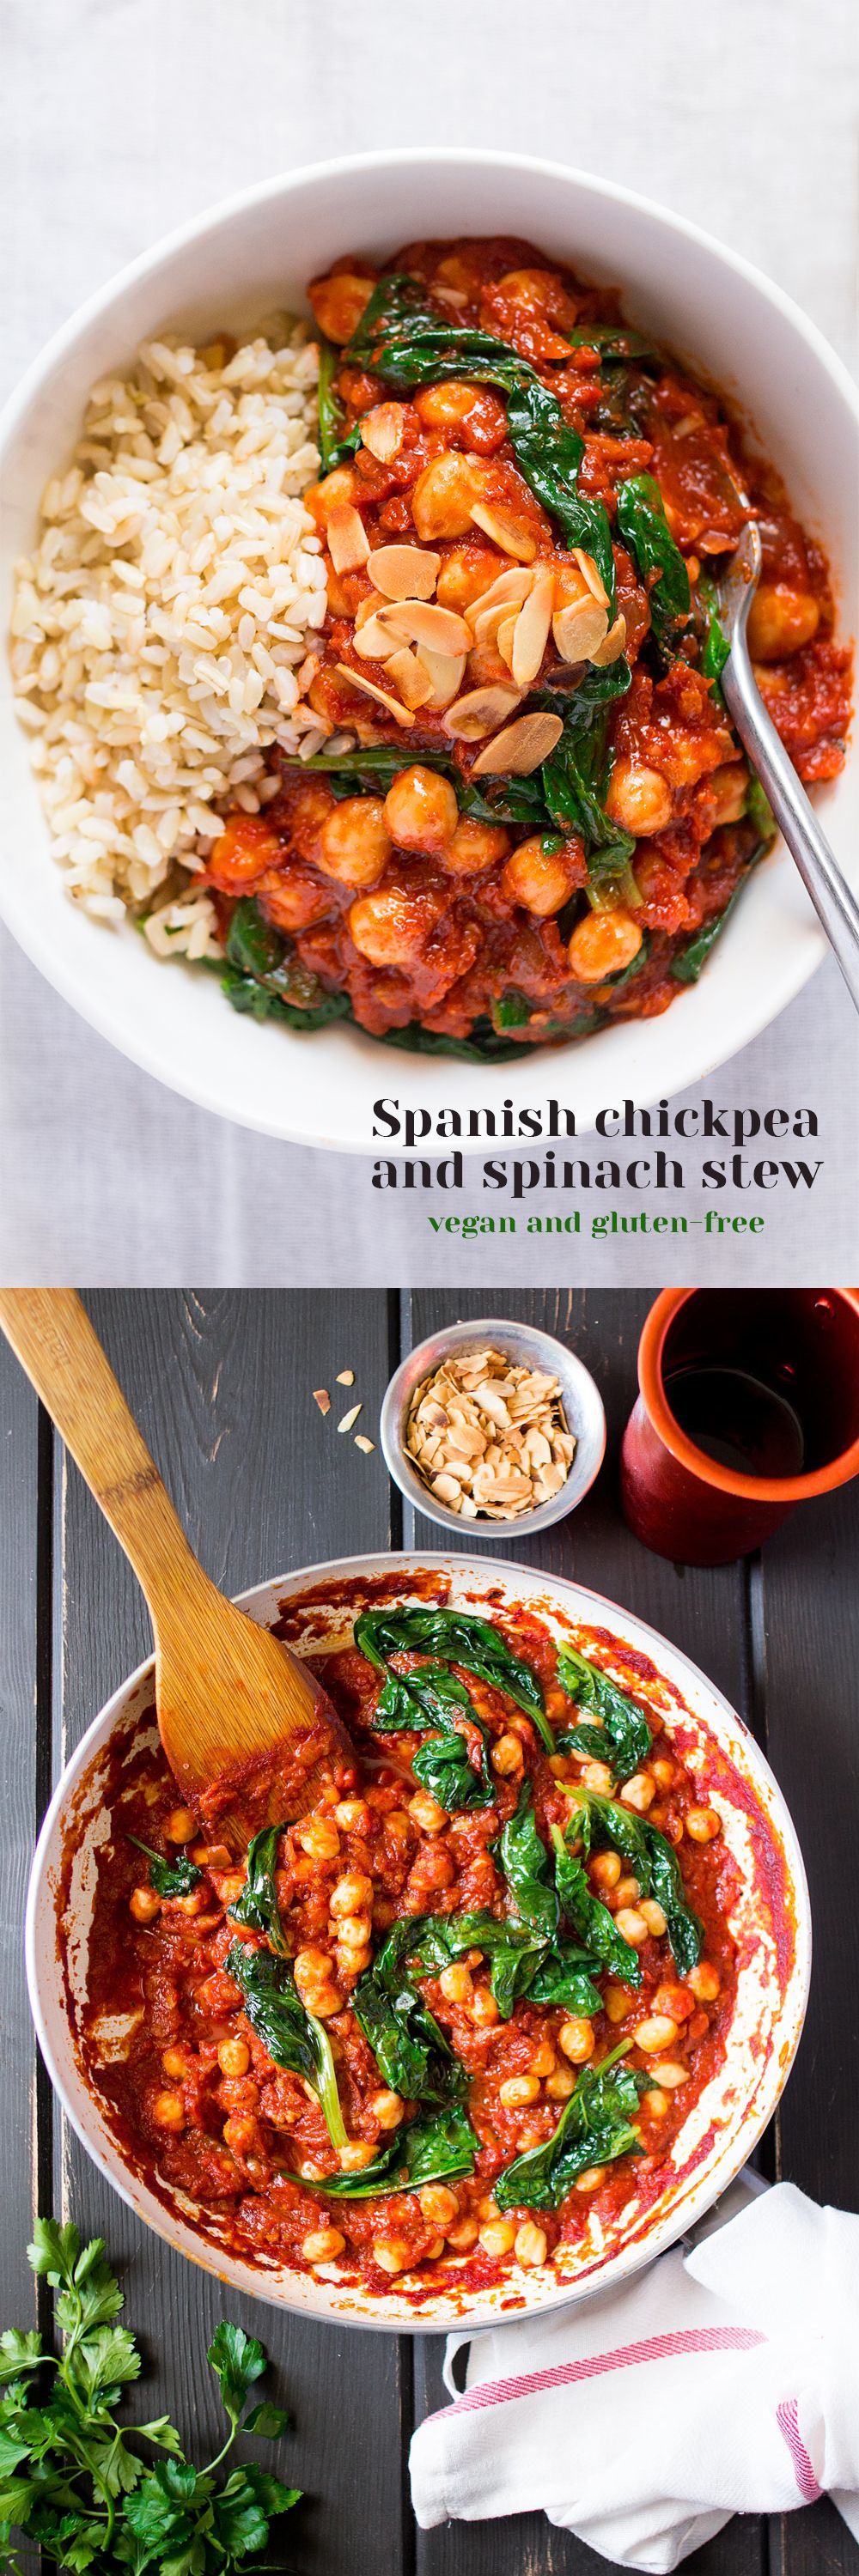 Spanish chickpea and spinach stew